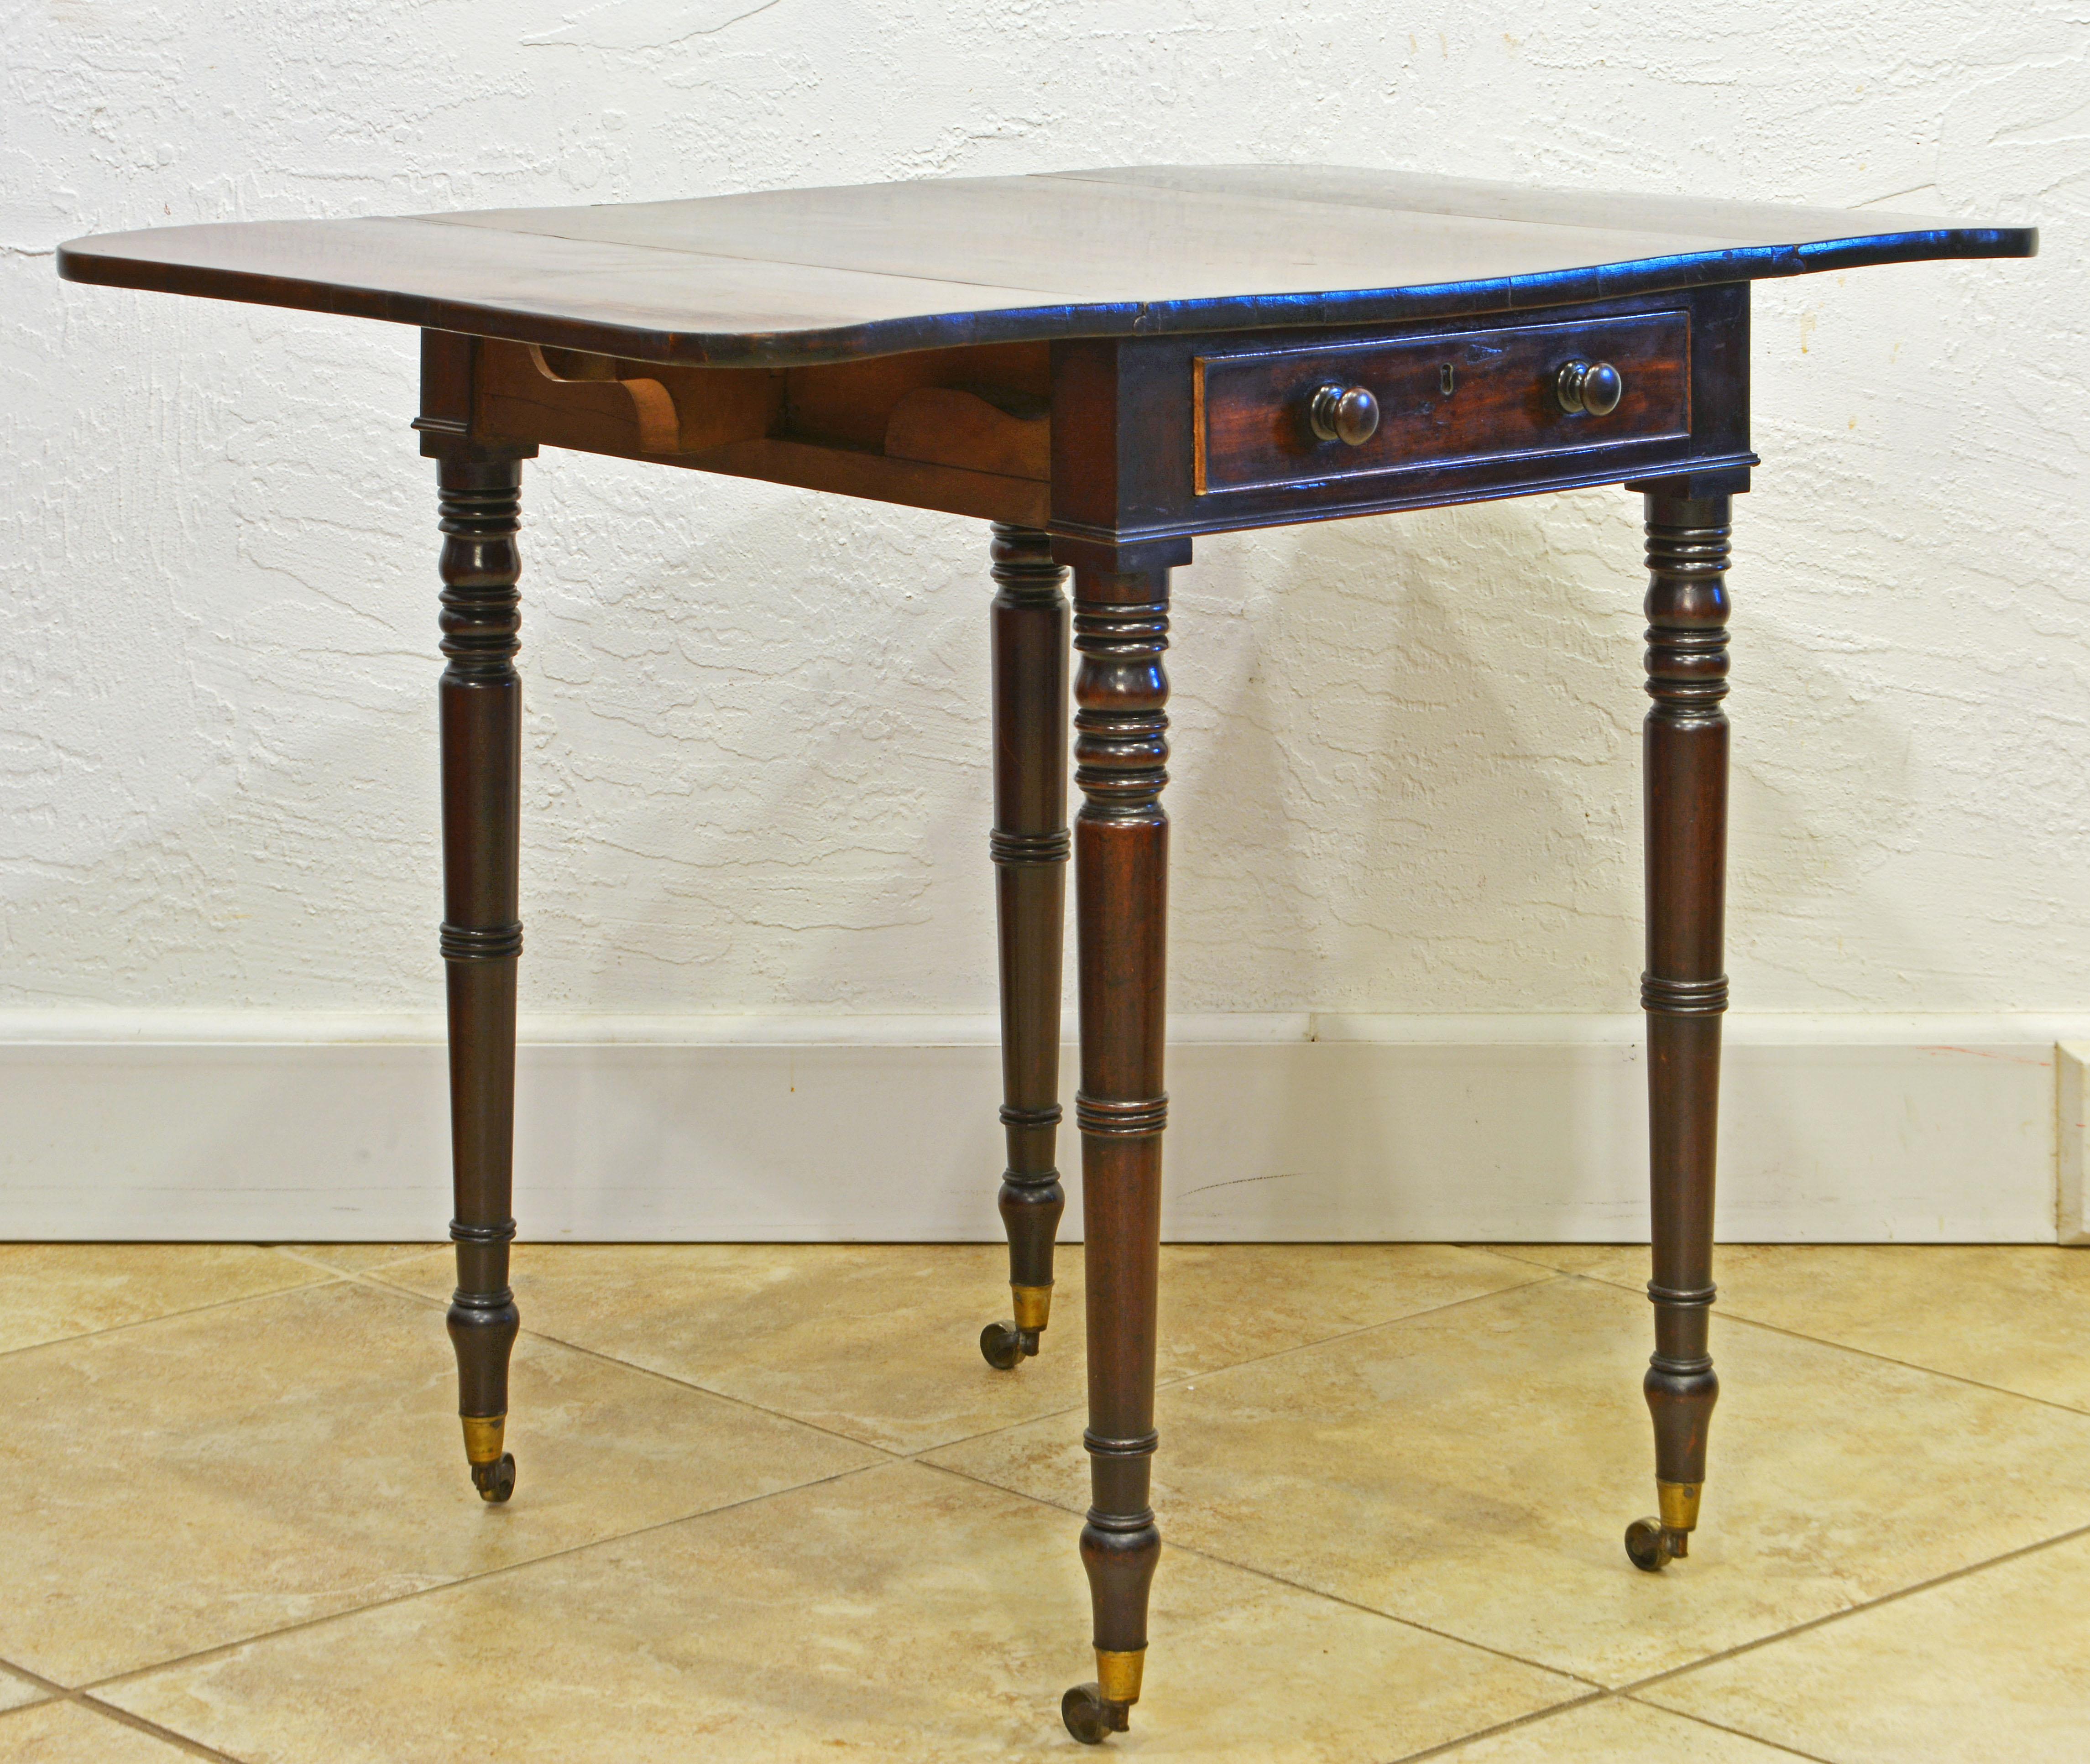 William IV Petite English Mahogany One Drawer Pembroke Table with Turned Legs, Circa 1840